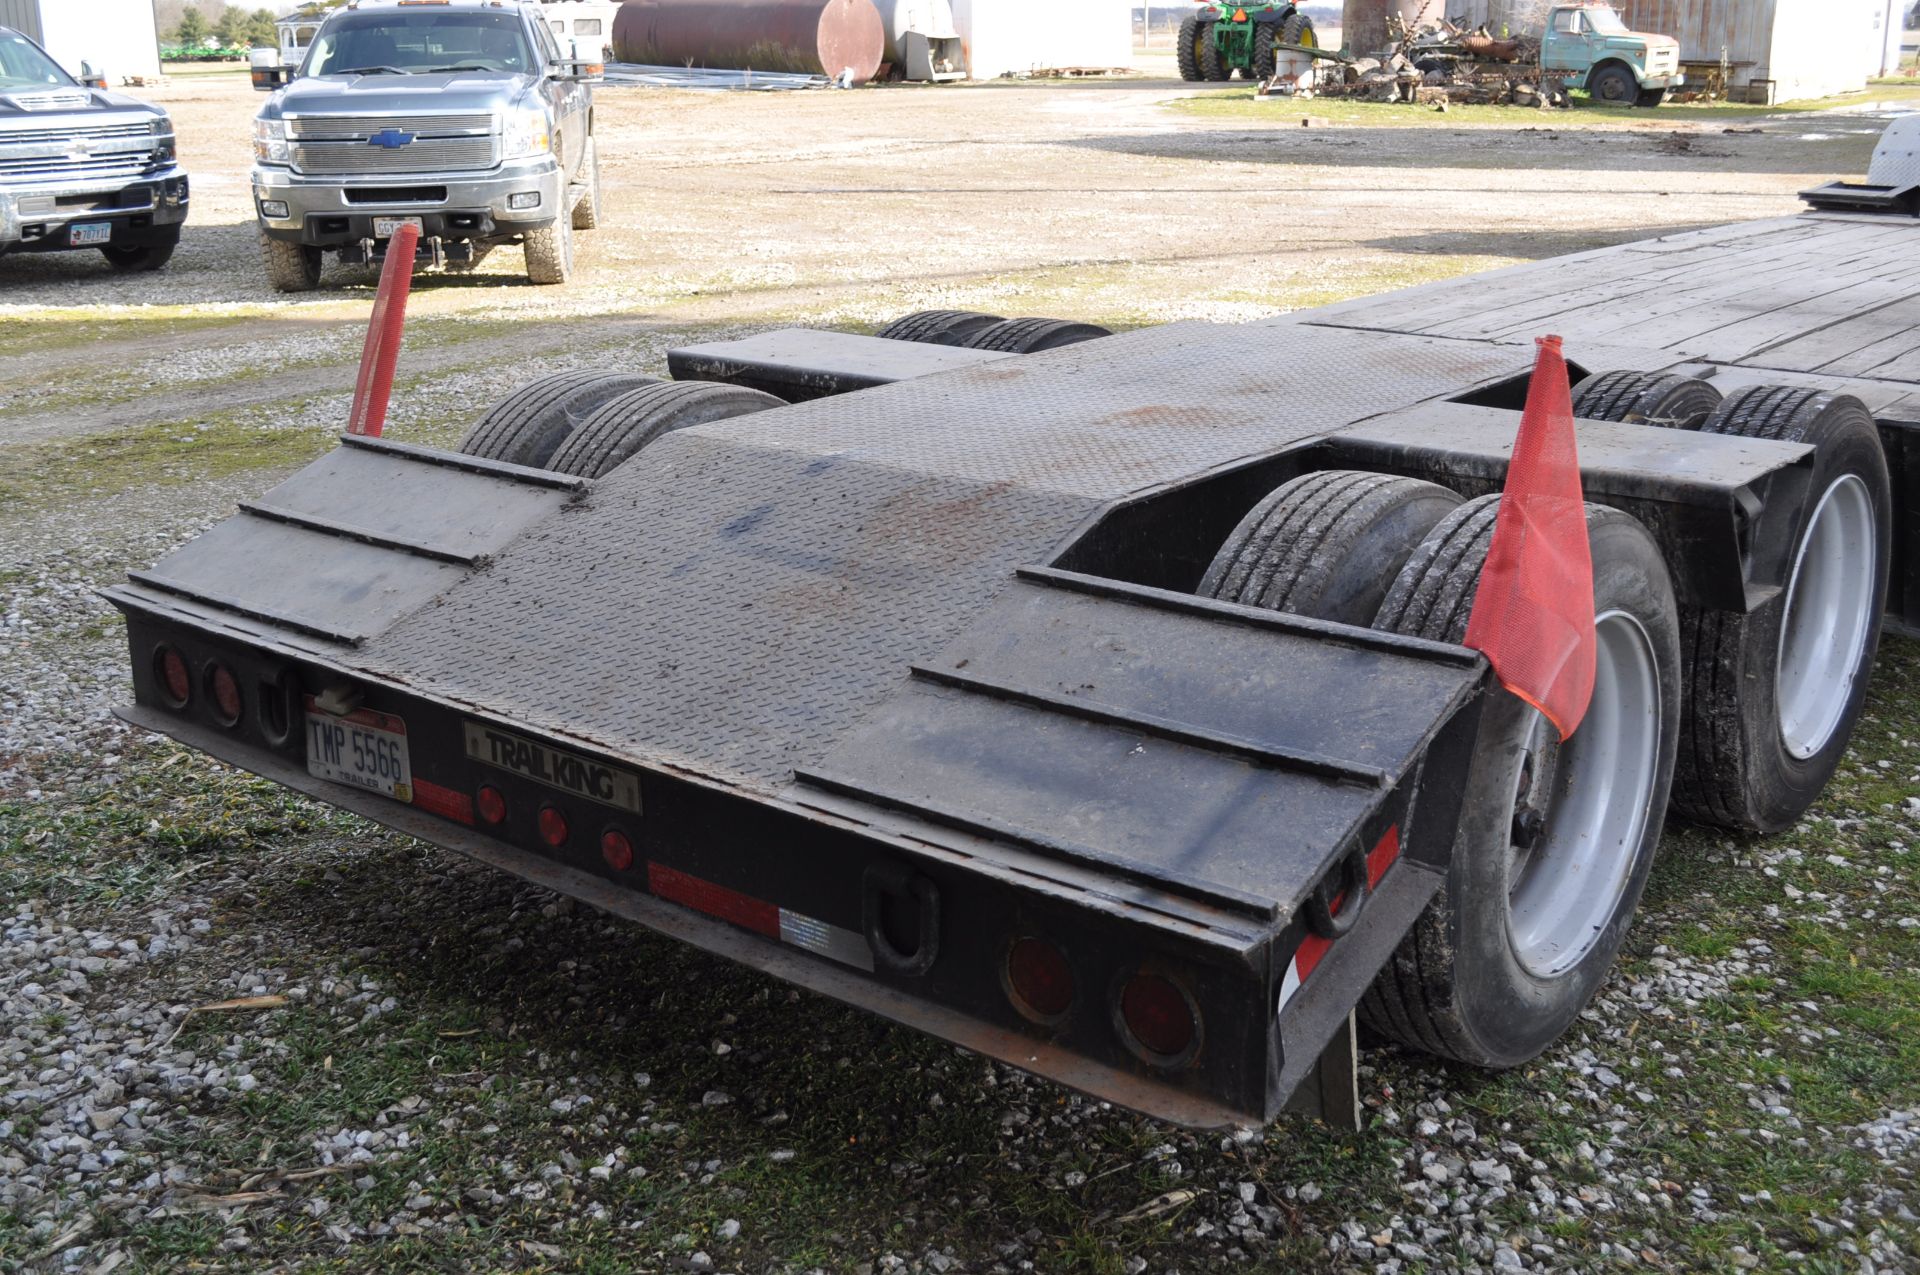 1990 Trail King TK70DGP-432 hyd detach trailer, NEW self contained power unit, 22’ well, 43’ overall - Image 10 of 16